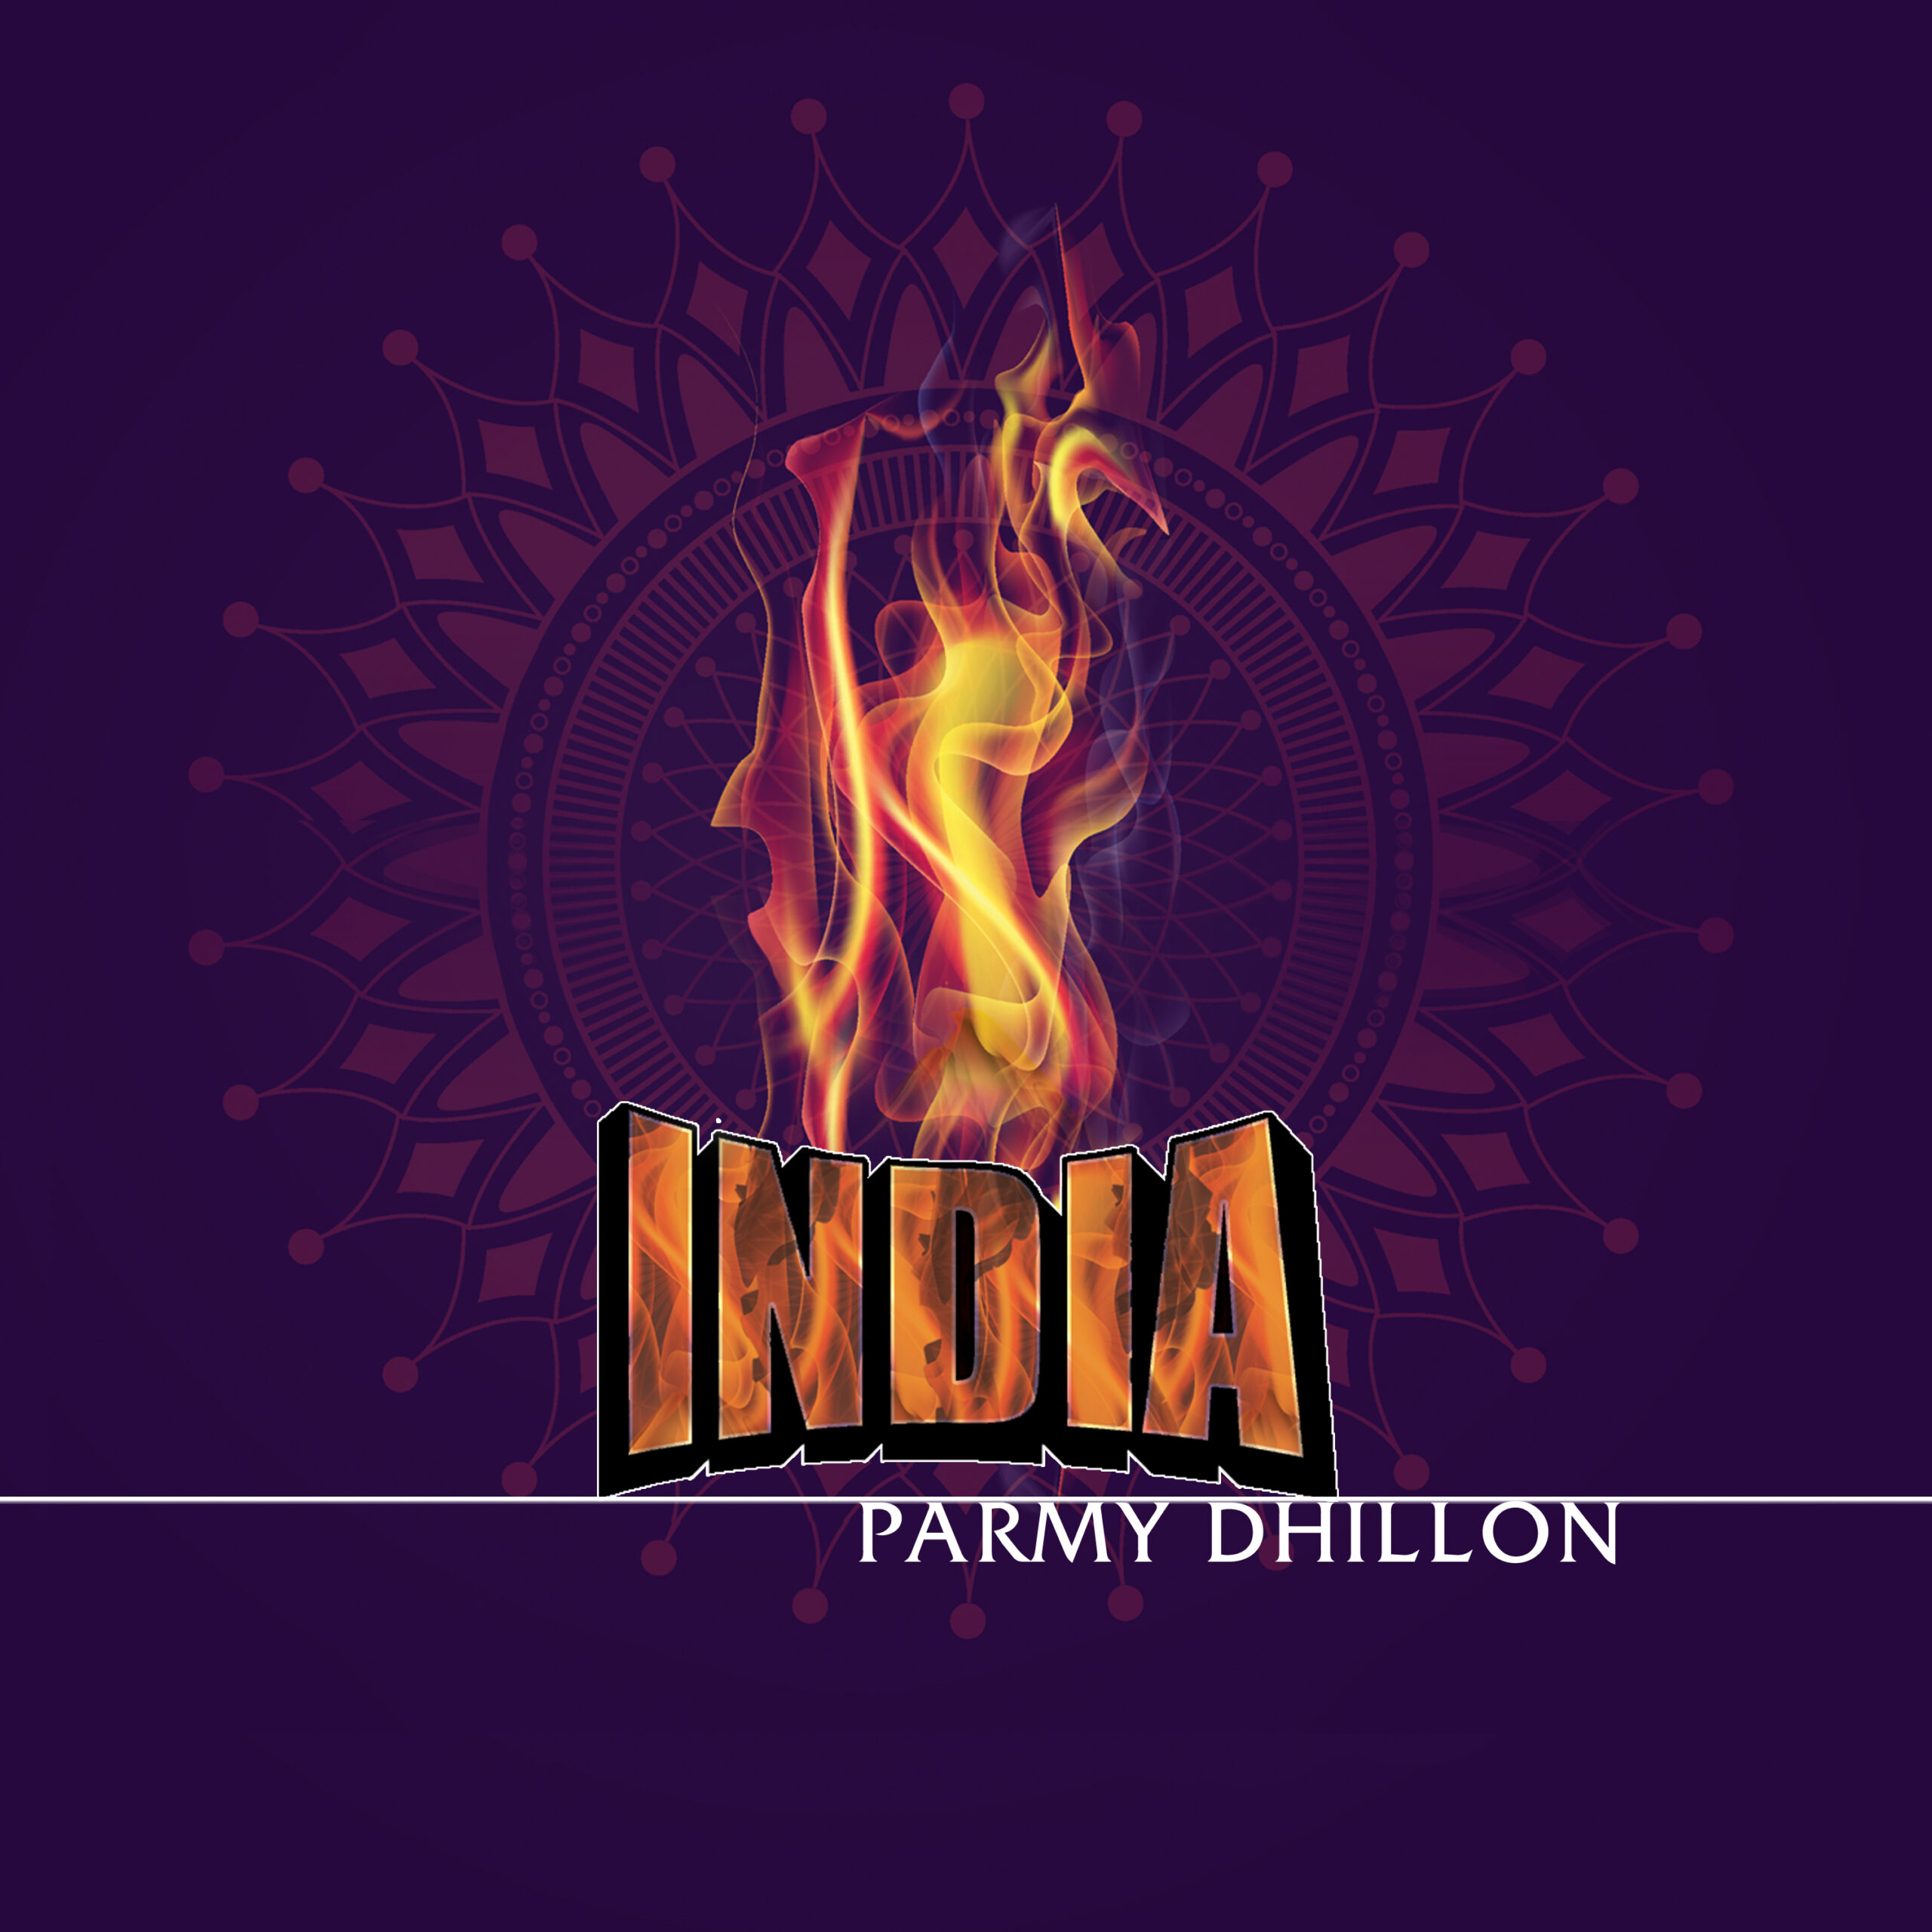 Parmy Dhillon’s New Single “India”: A Heartfelt Tribute to Heritage and Loss